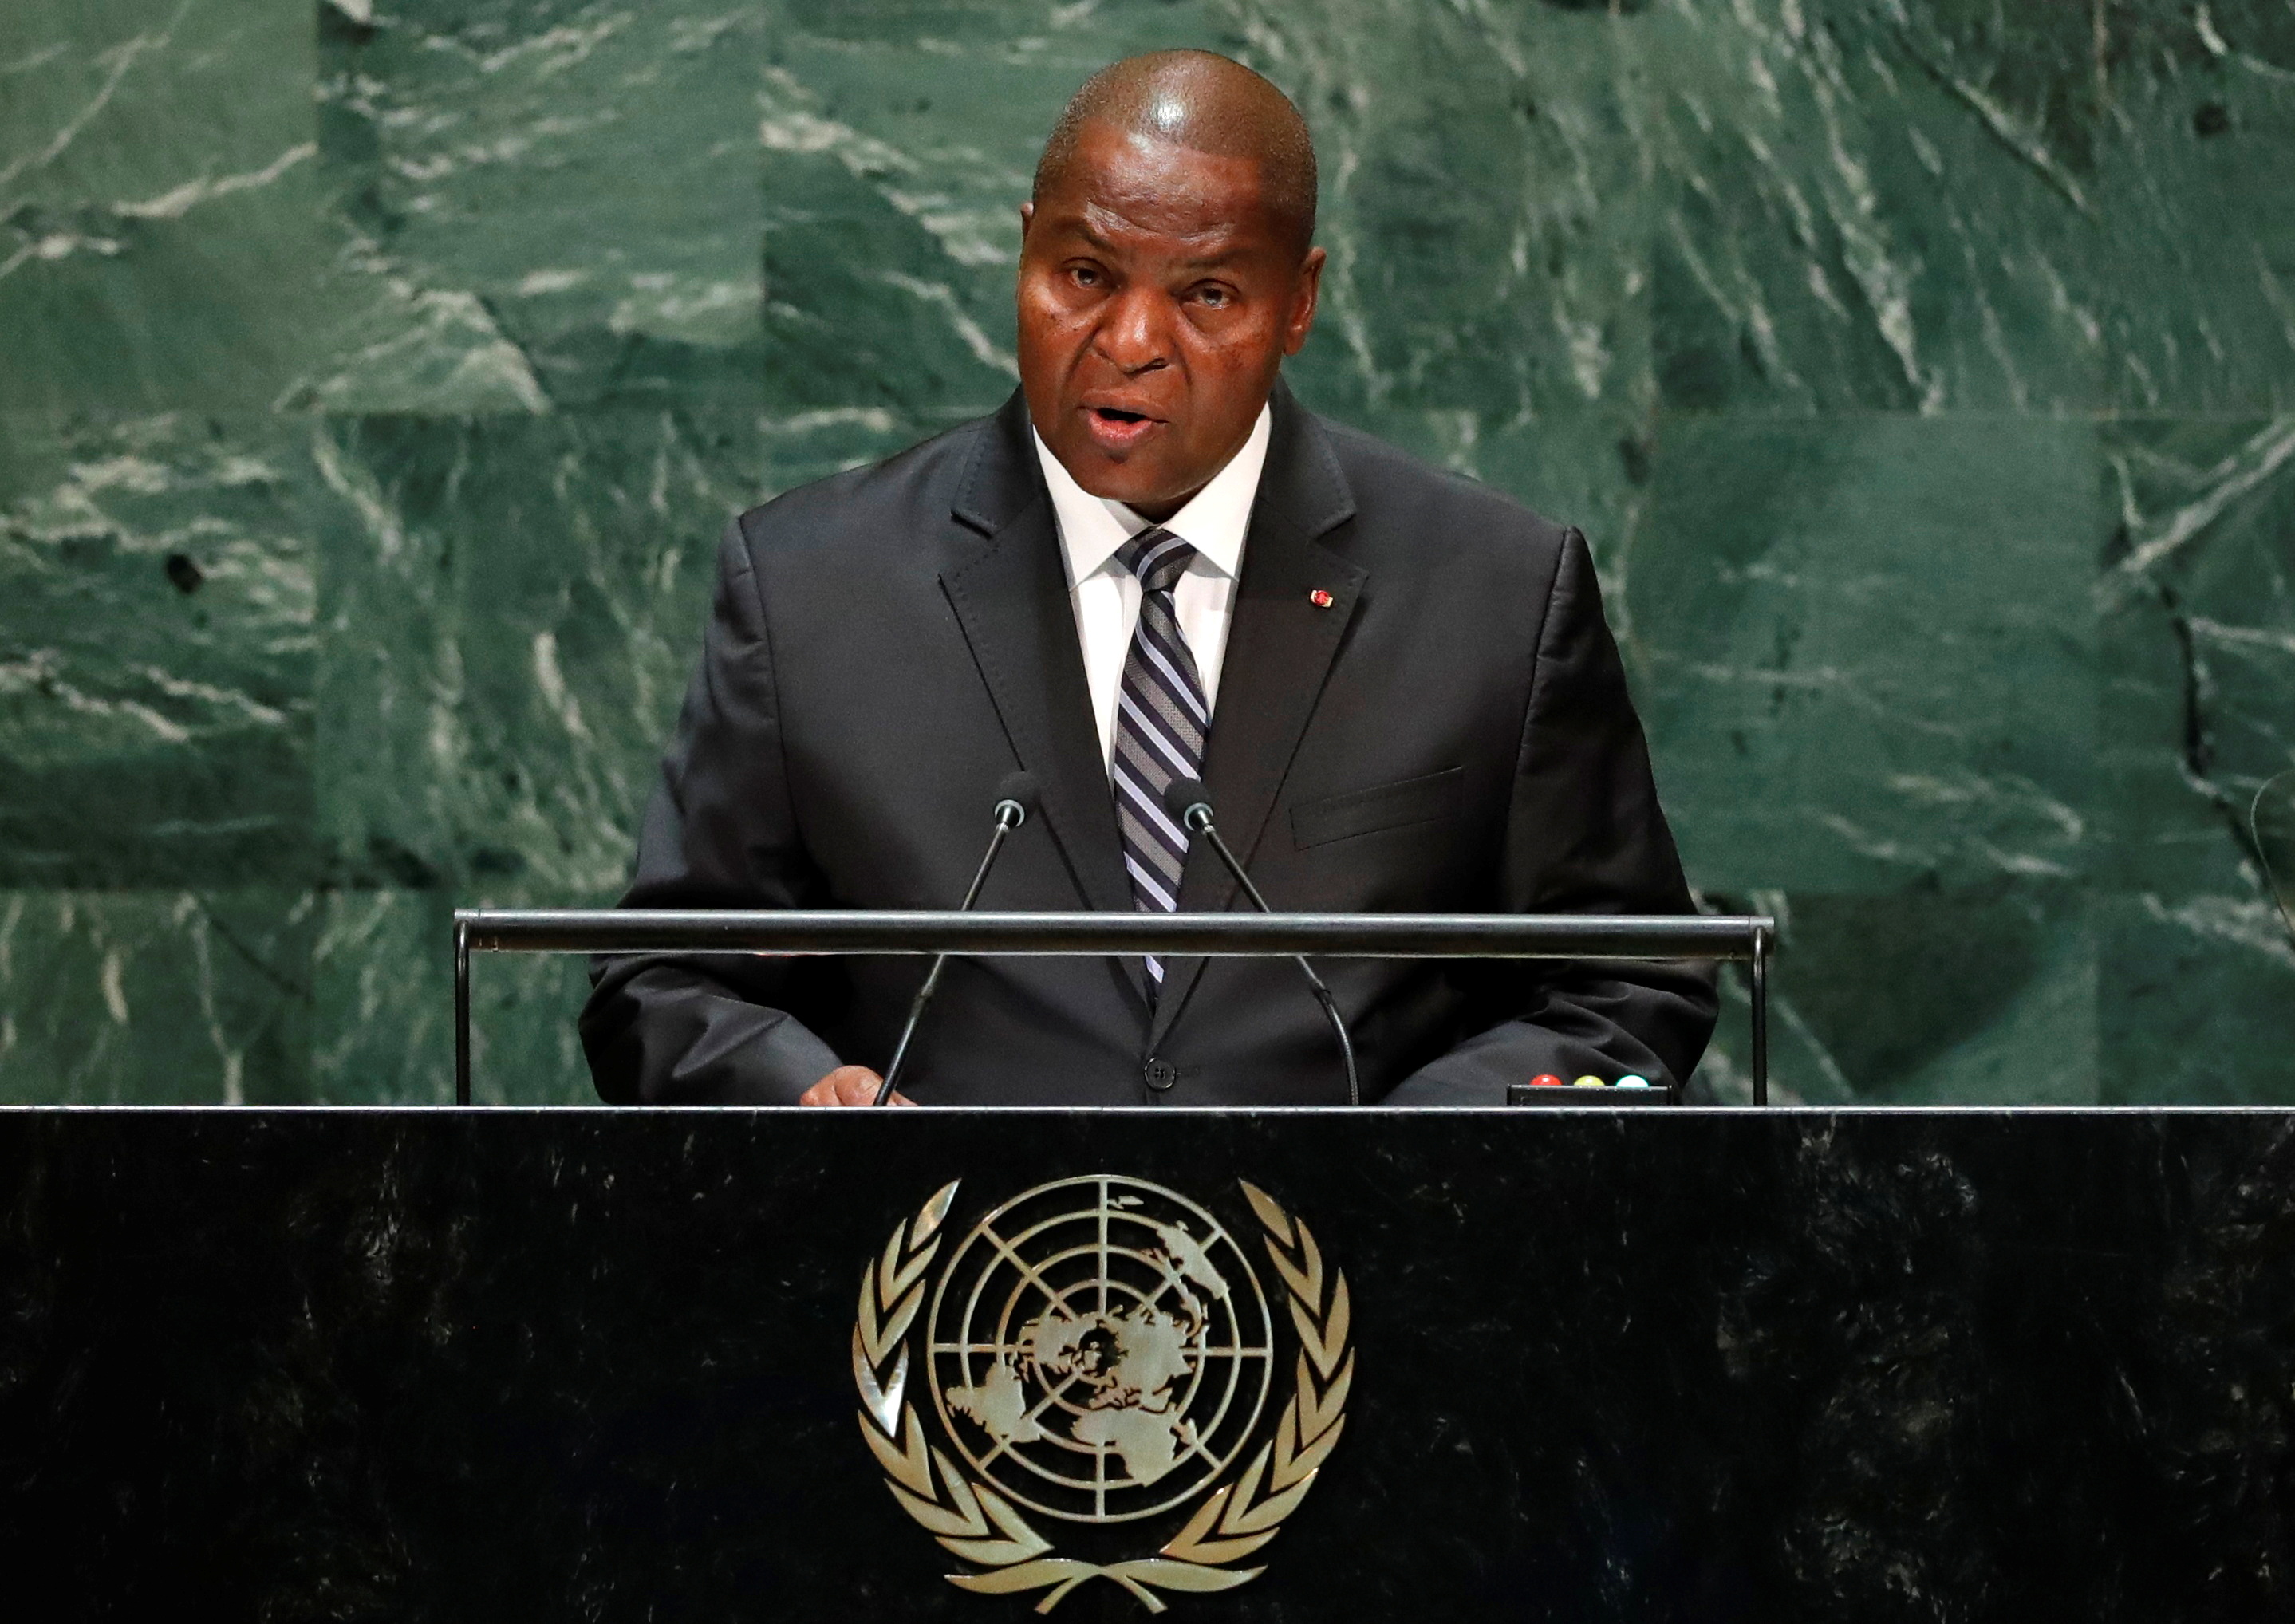 Central African Republic President Faustin Archange Touadera addresses the 74th session of the United Nations General Assembly at U.N. headquarters in New York City, New York, U.S.